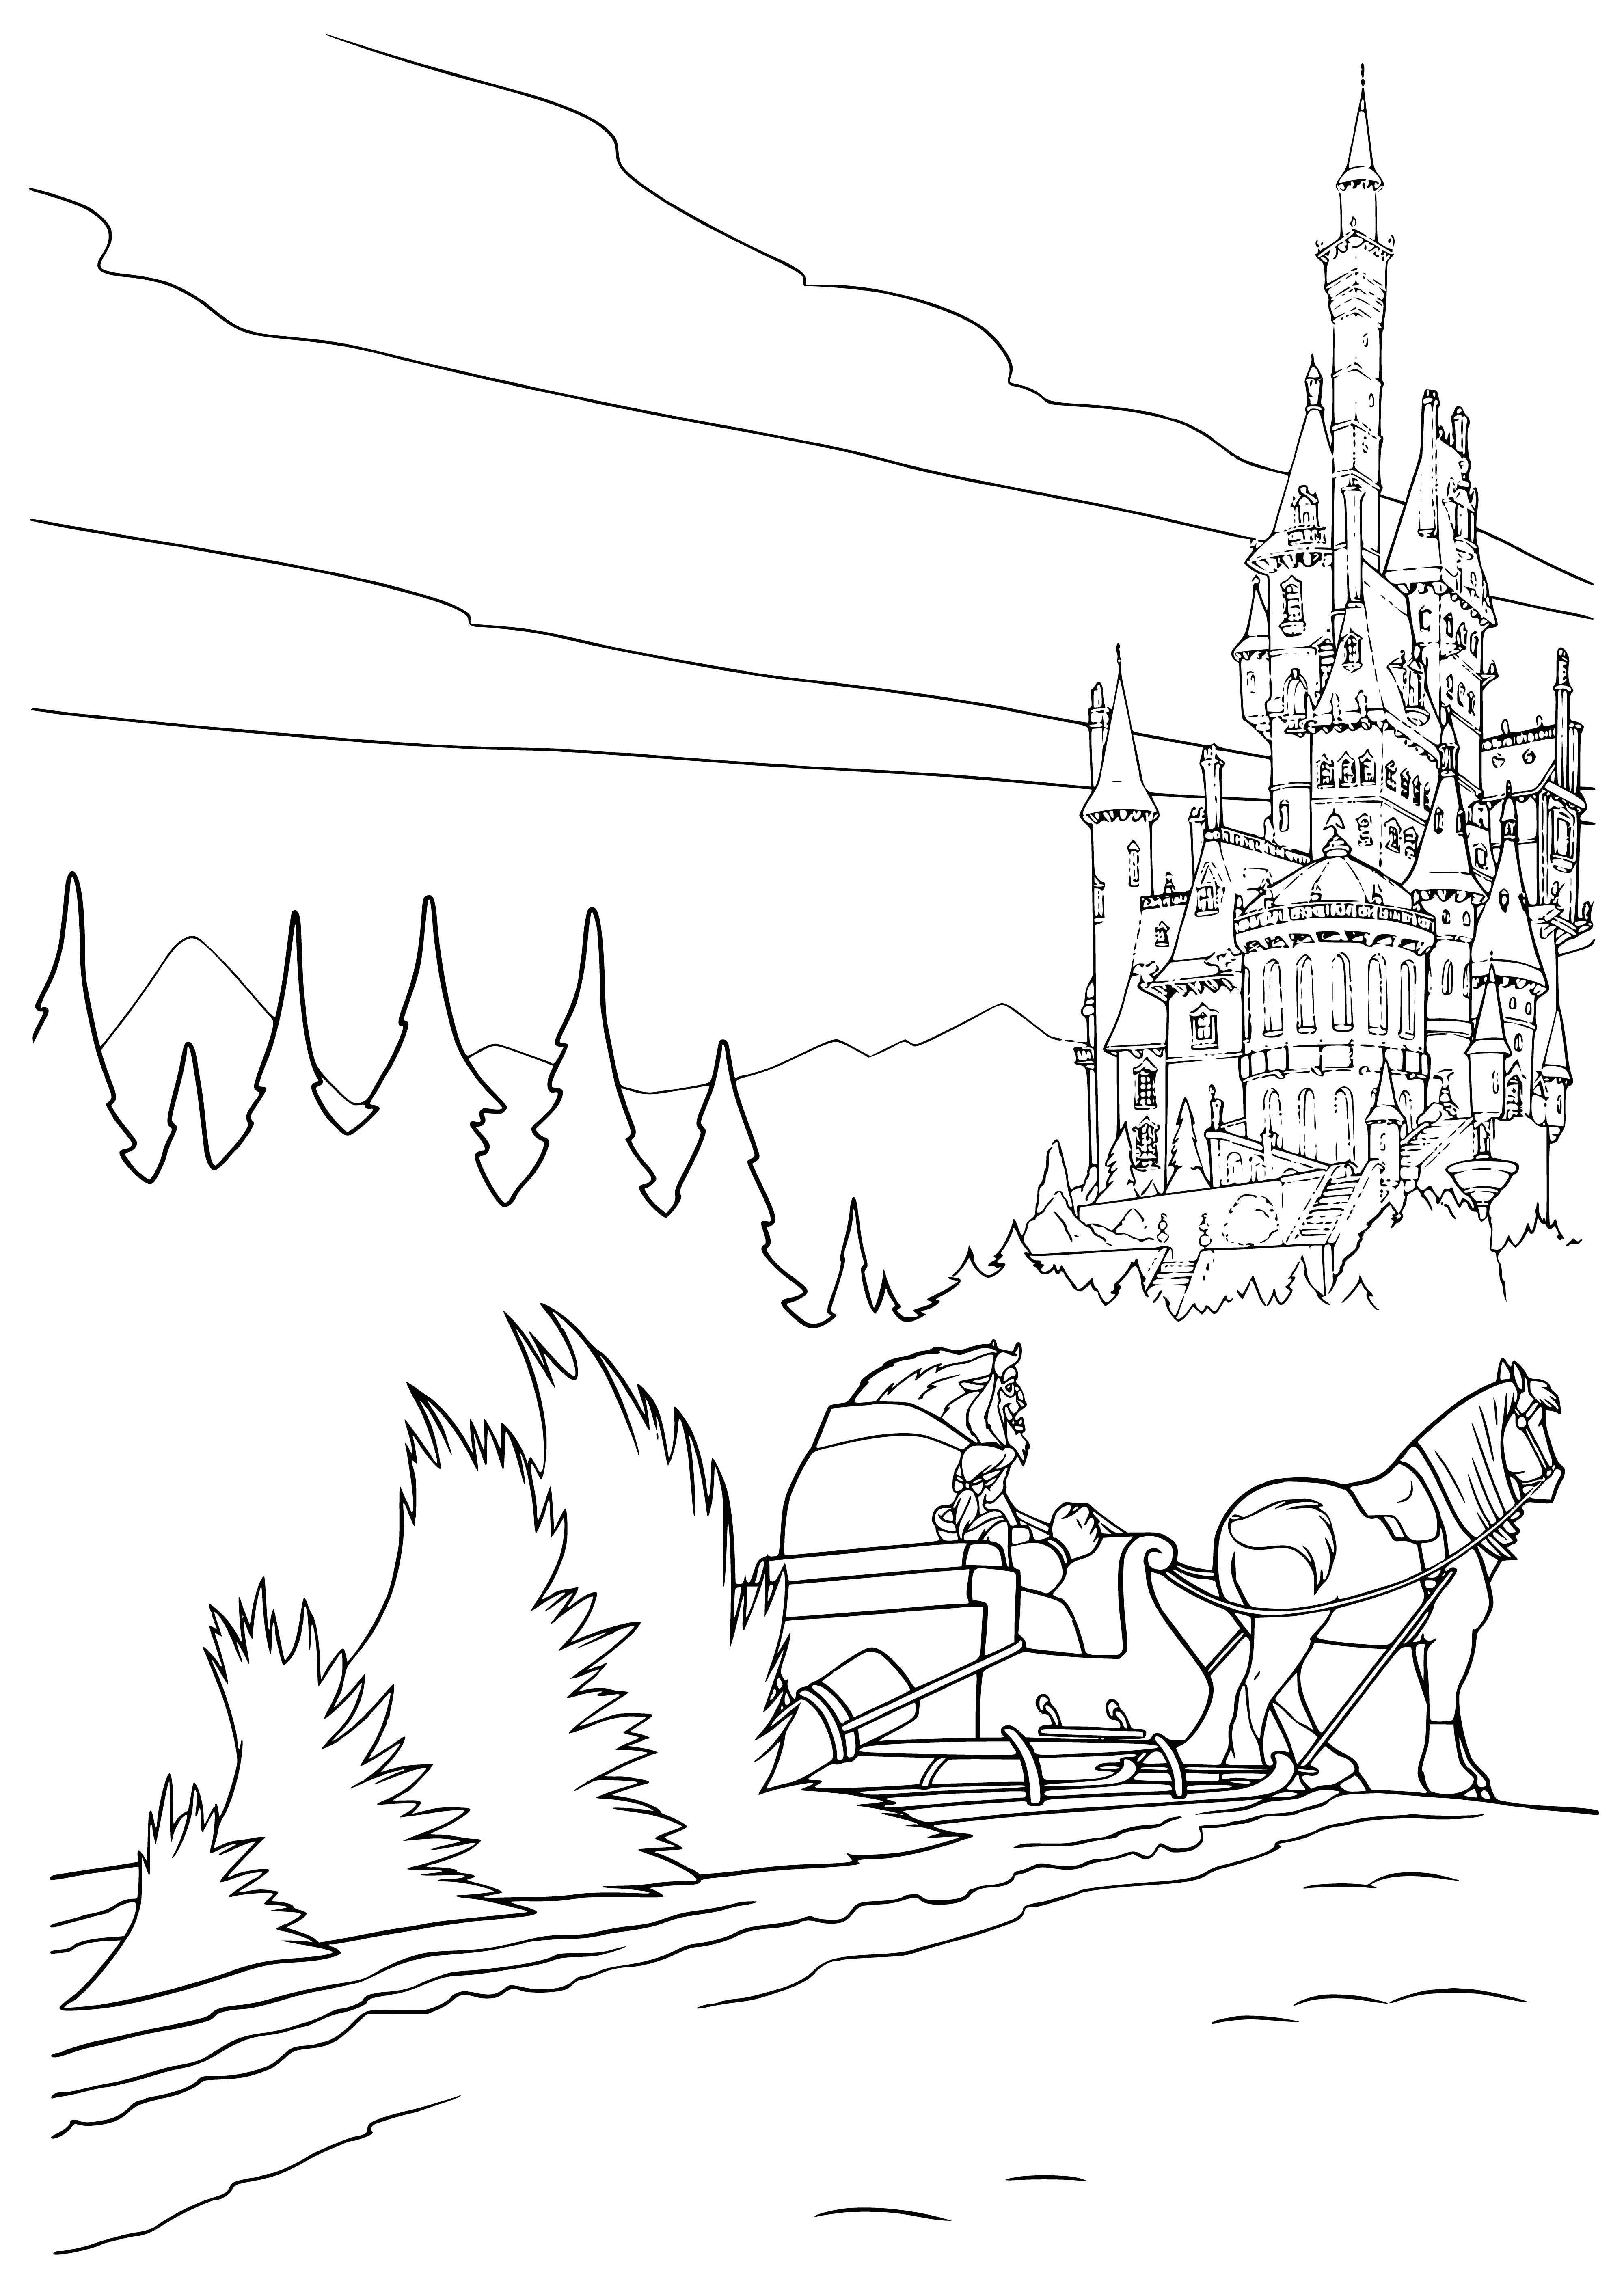 coloring page: -> The Disney princesses cheer as the monster brings a New Year's tree to the castle.